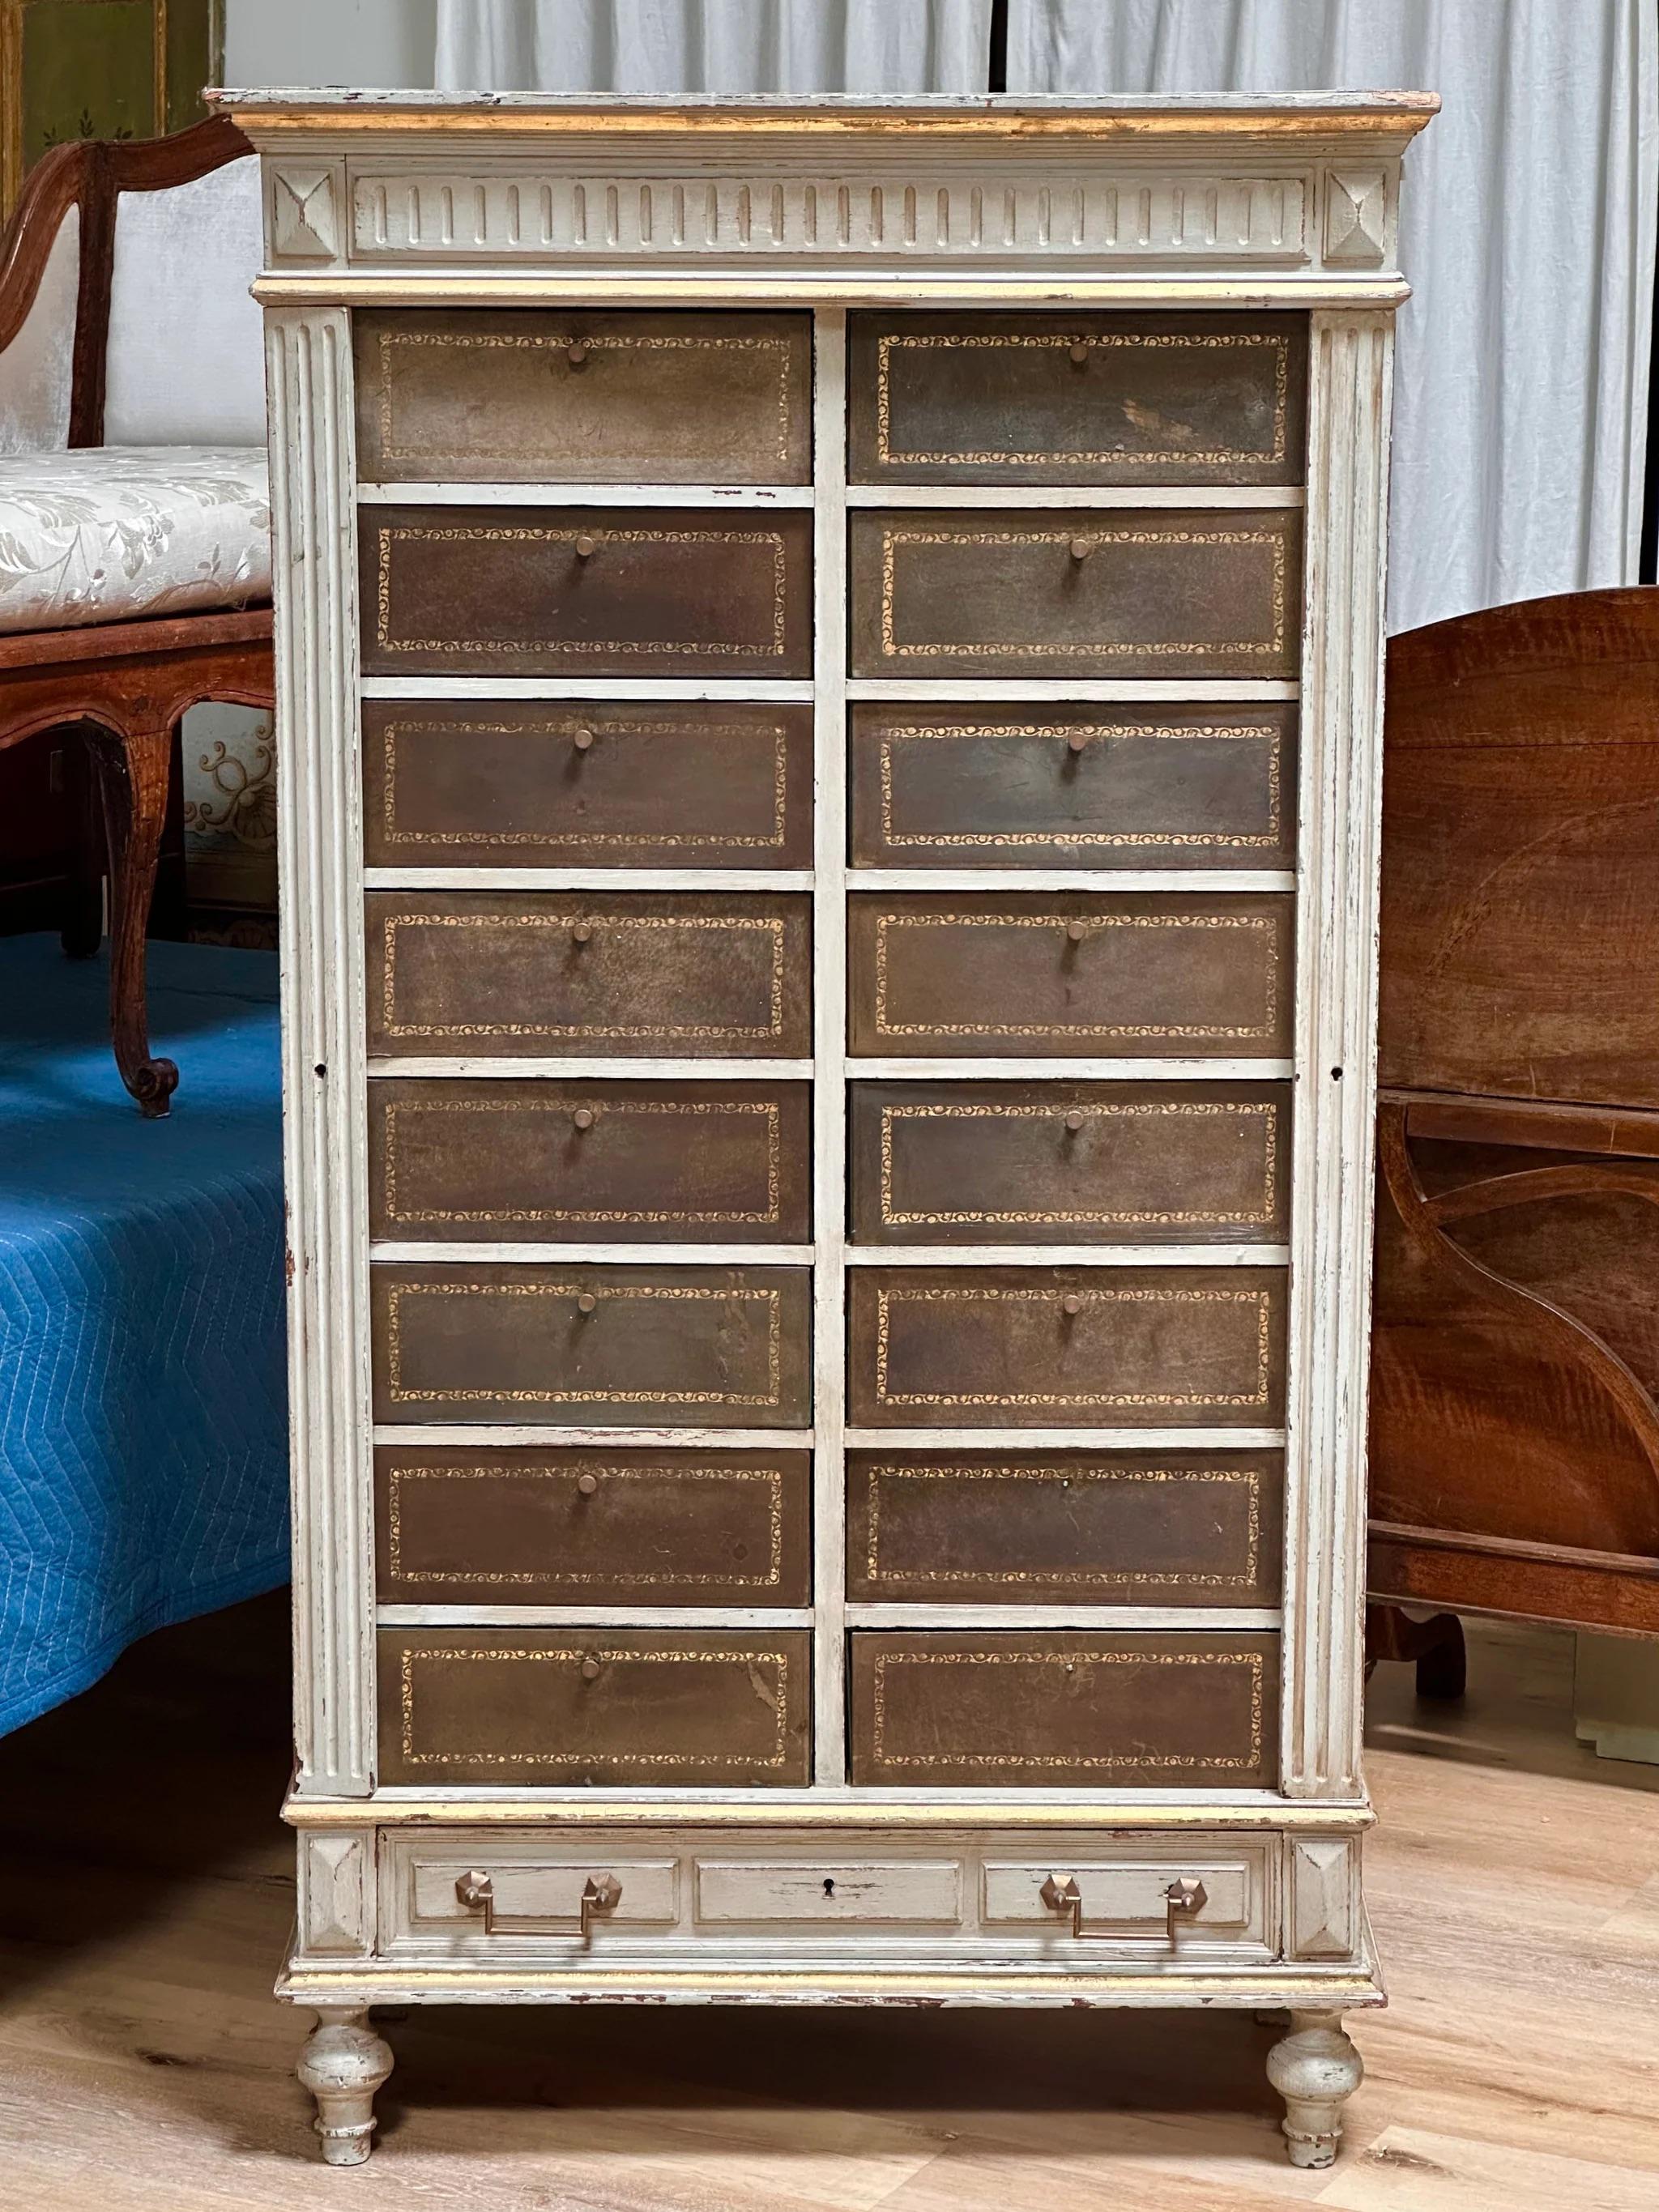 Cartonnier, cabinet, likely French or Swedish, 19th century, stepped ogee cornice over a fluted and blocked frieze, fluted side locks enclosing a bank of tooled leather clad cartonnier drawers, paneled base drawer, toupie feet, 65 x 36-1/4 x 15 in.

